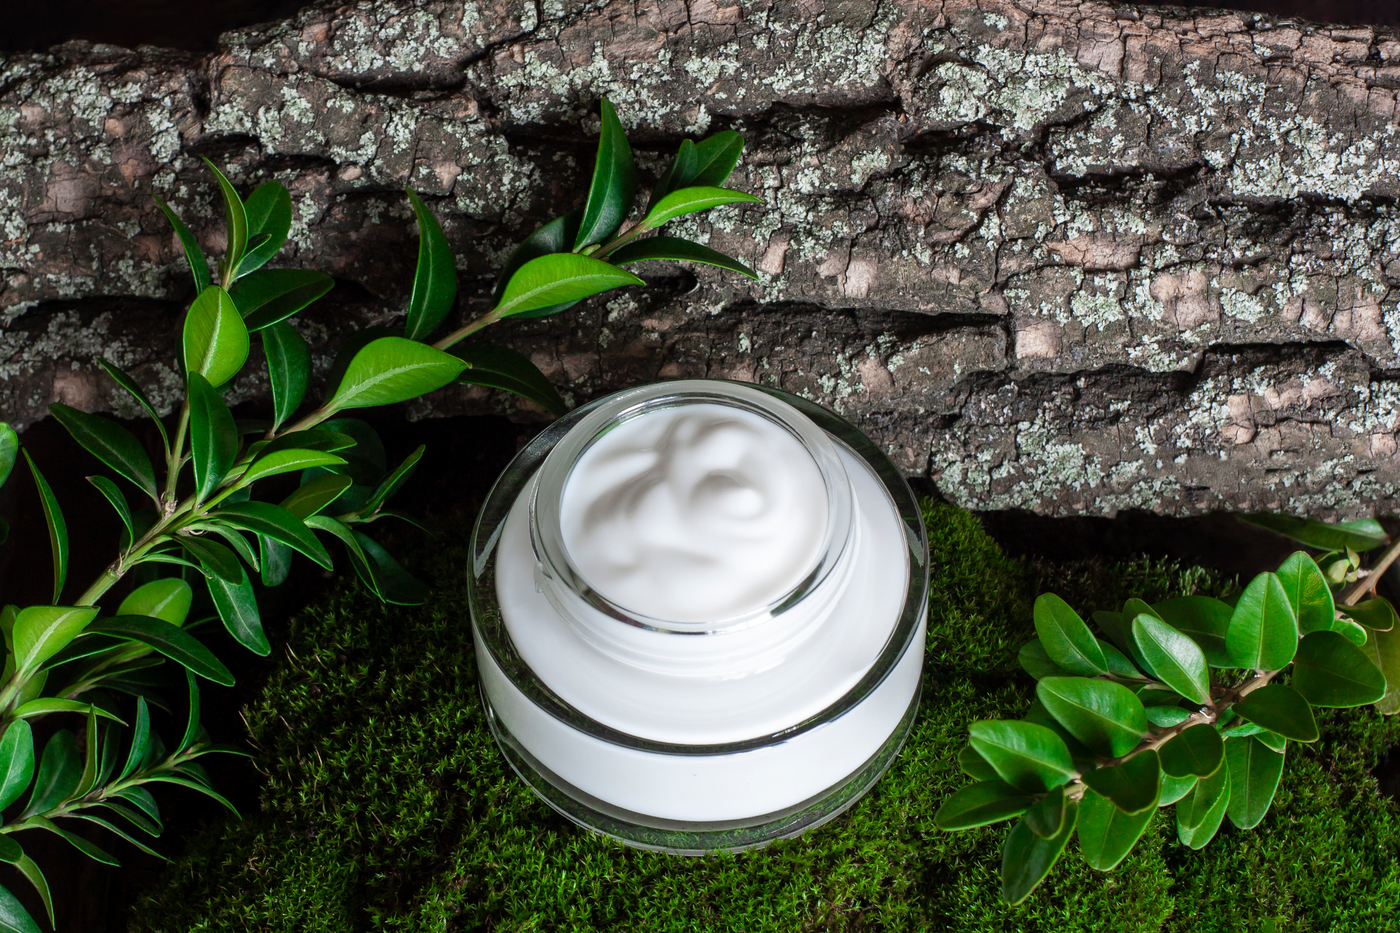 We believe that skincare products that nourish, restore and relieve can come form natural organic ingredients.